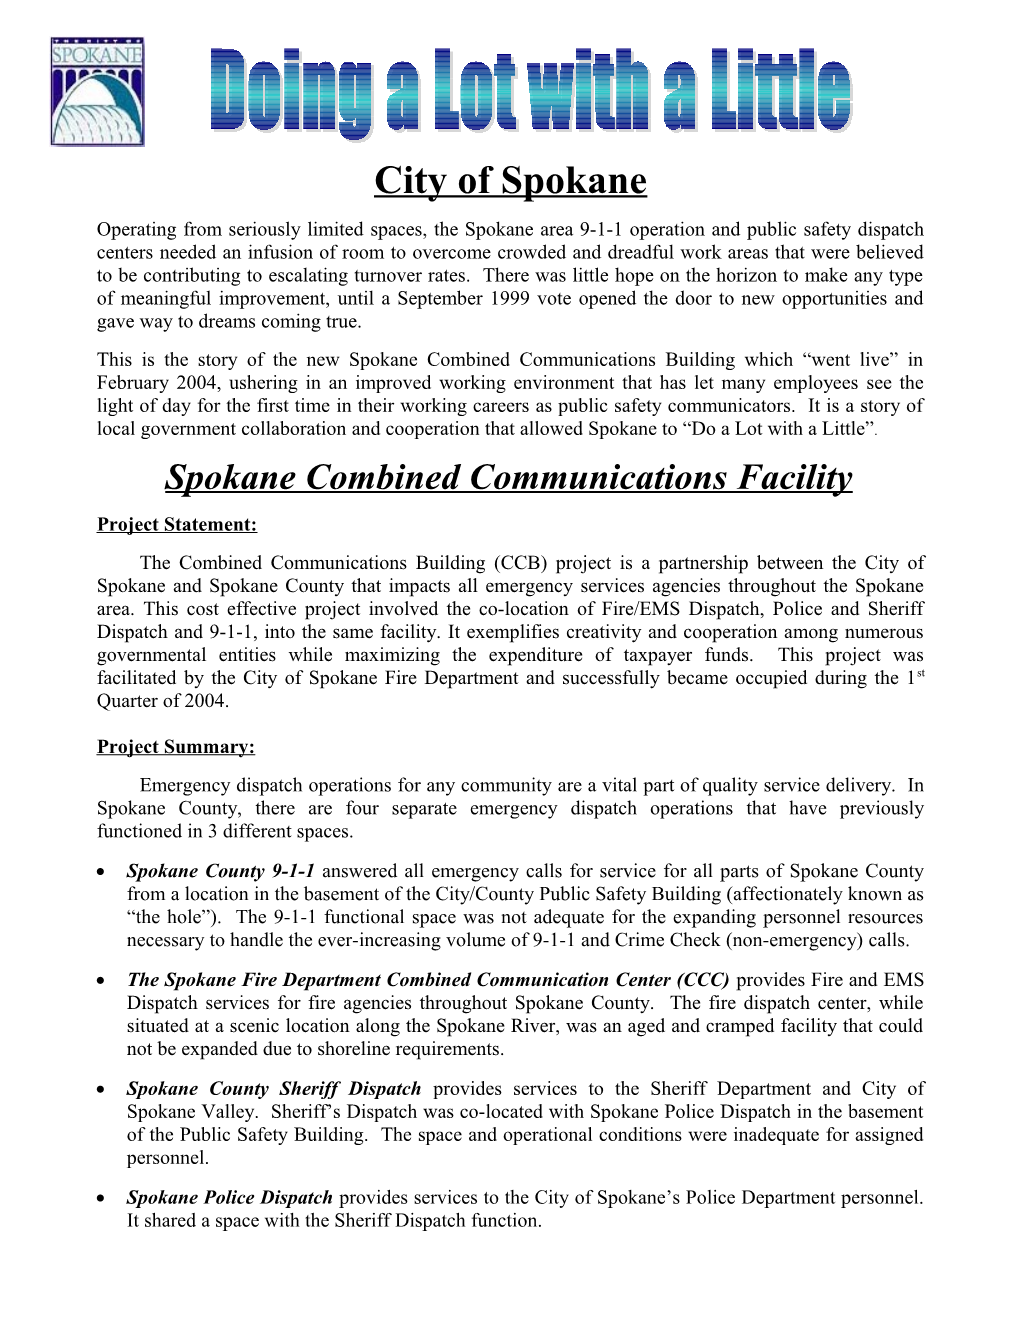 Low Bid of Lydig Construction (Spokane) for Construction of a Combined Communications Center